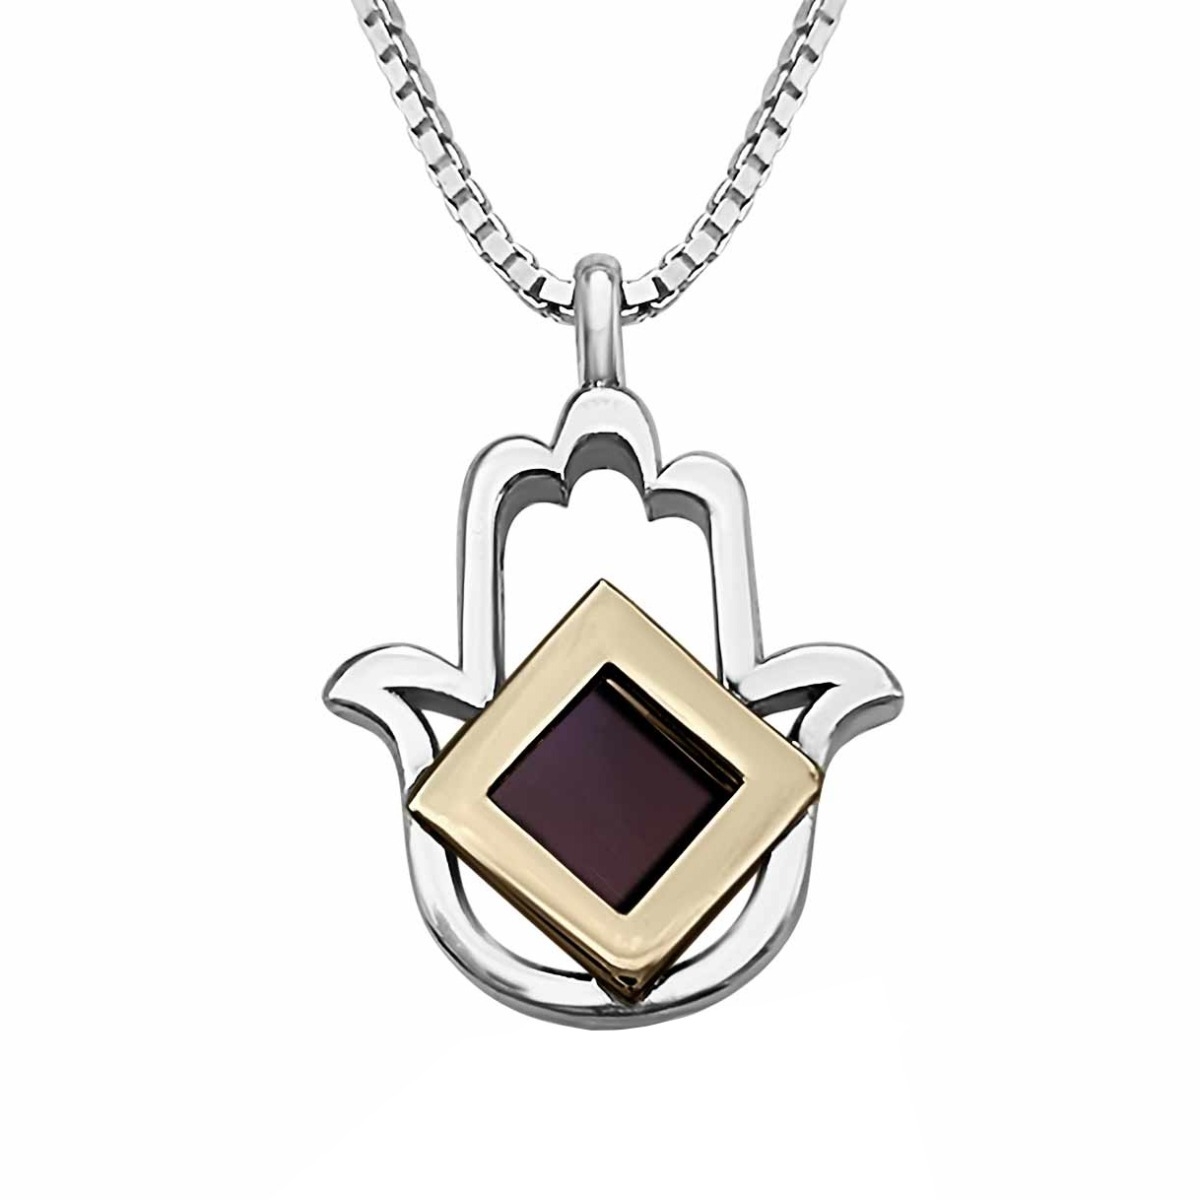 Hamsa Pendant with Micro-Inscribed Bible Chip - Silver or 14K Gold - 1